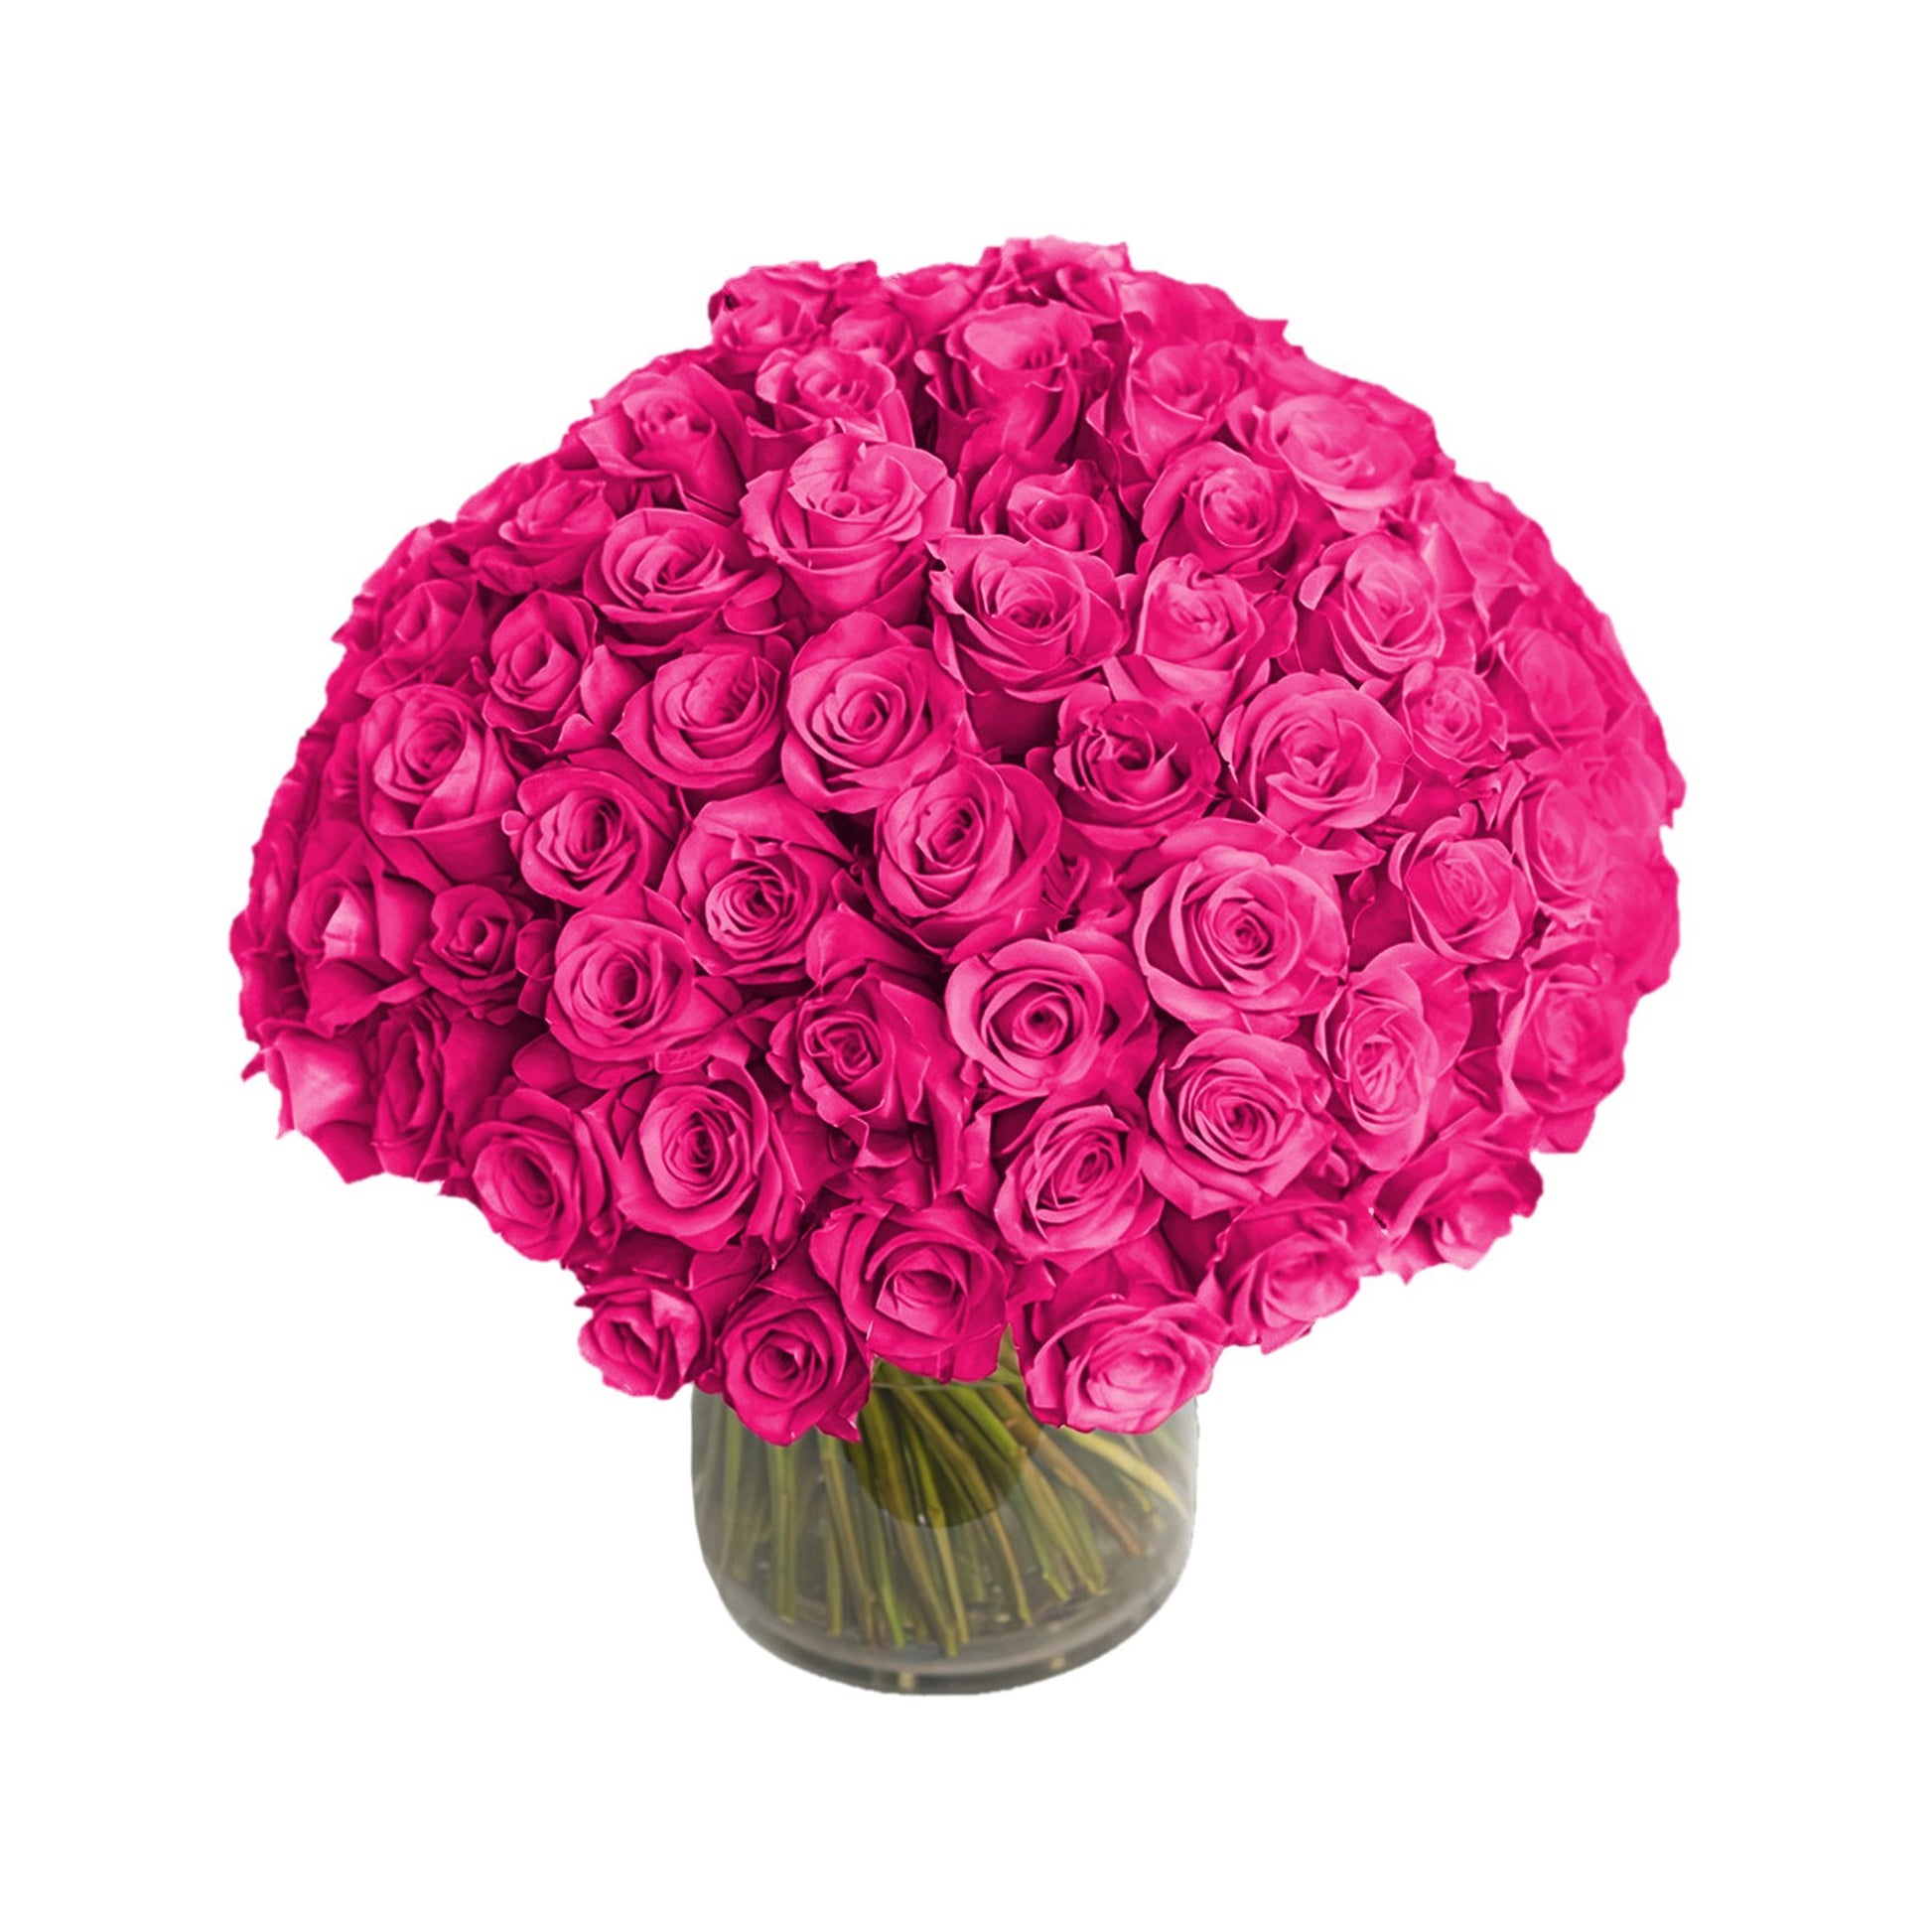 NYC Flower Delivery - Fresh Roses in a Vase | 100 Hot Pink Roses - Roses